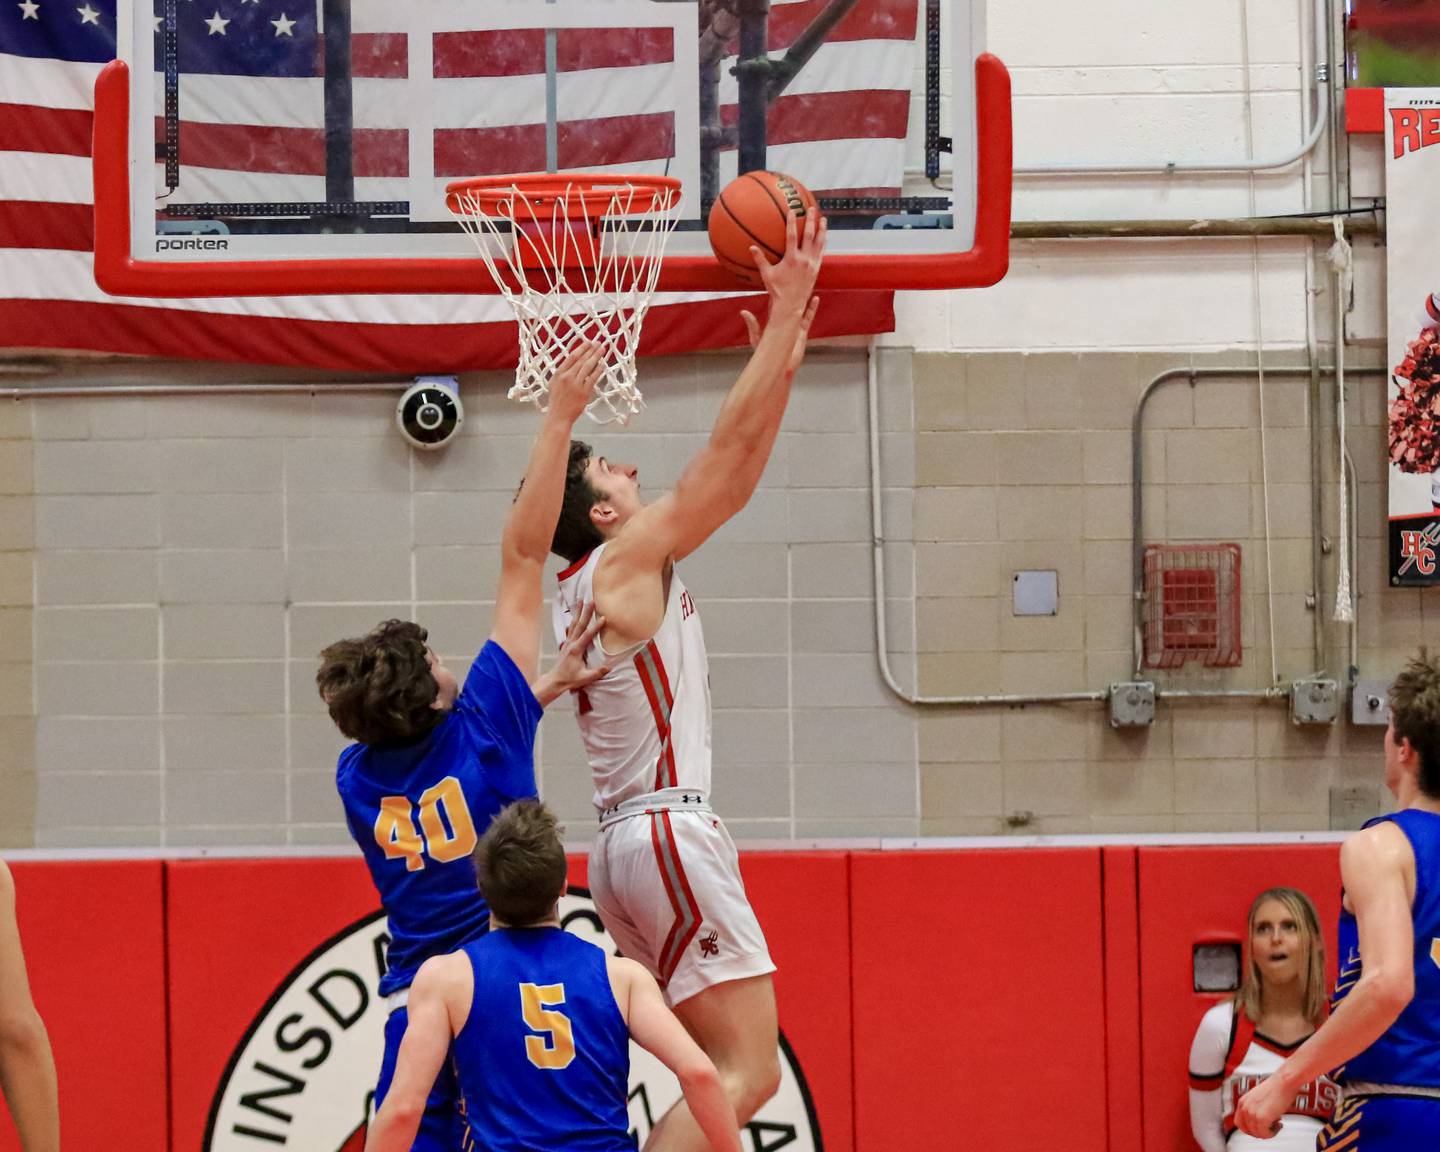 Hinsdale Central's Chase Collignon (4) puts up a reverse layup over Lyons Brady Chambers (40) during varsity basketball game between Lyons at Hinsdale Central.  Jan 20, 2023.